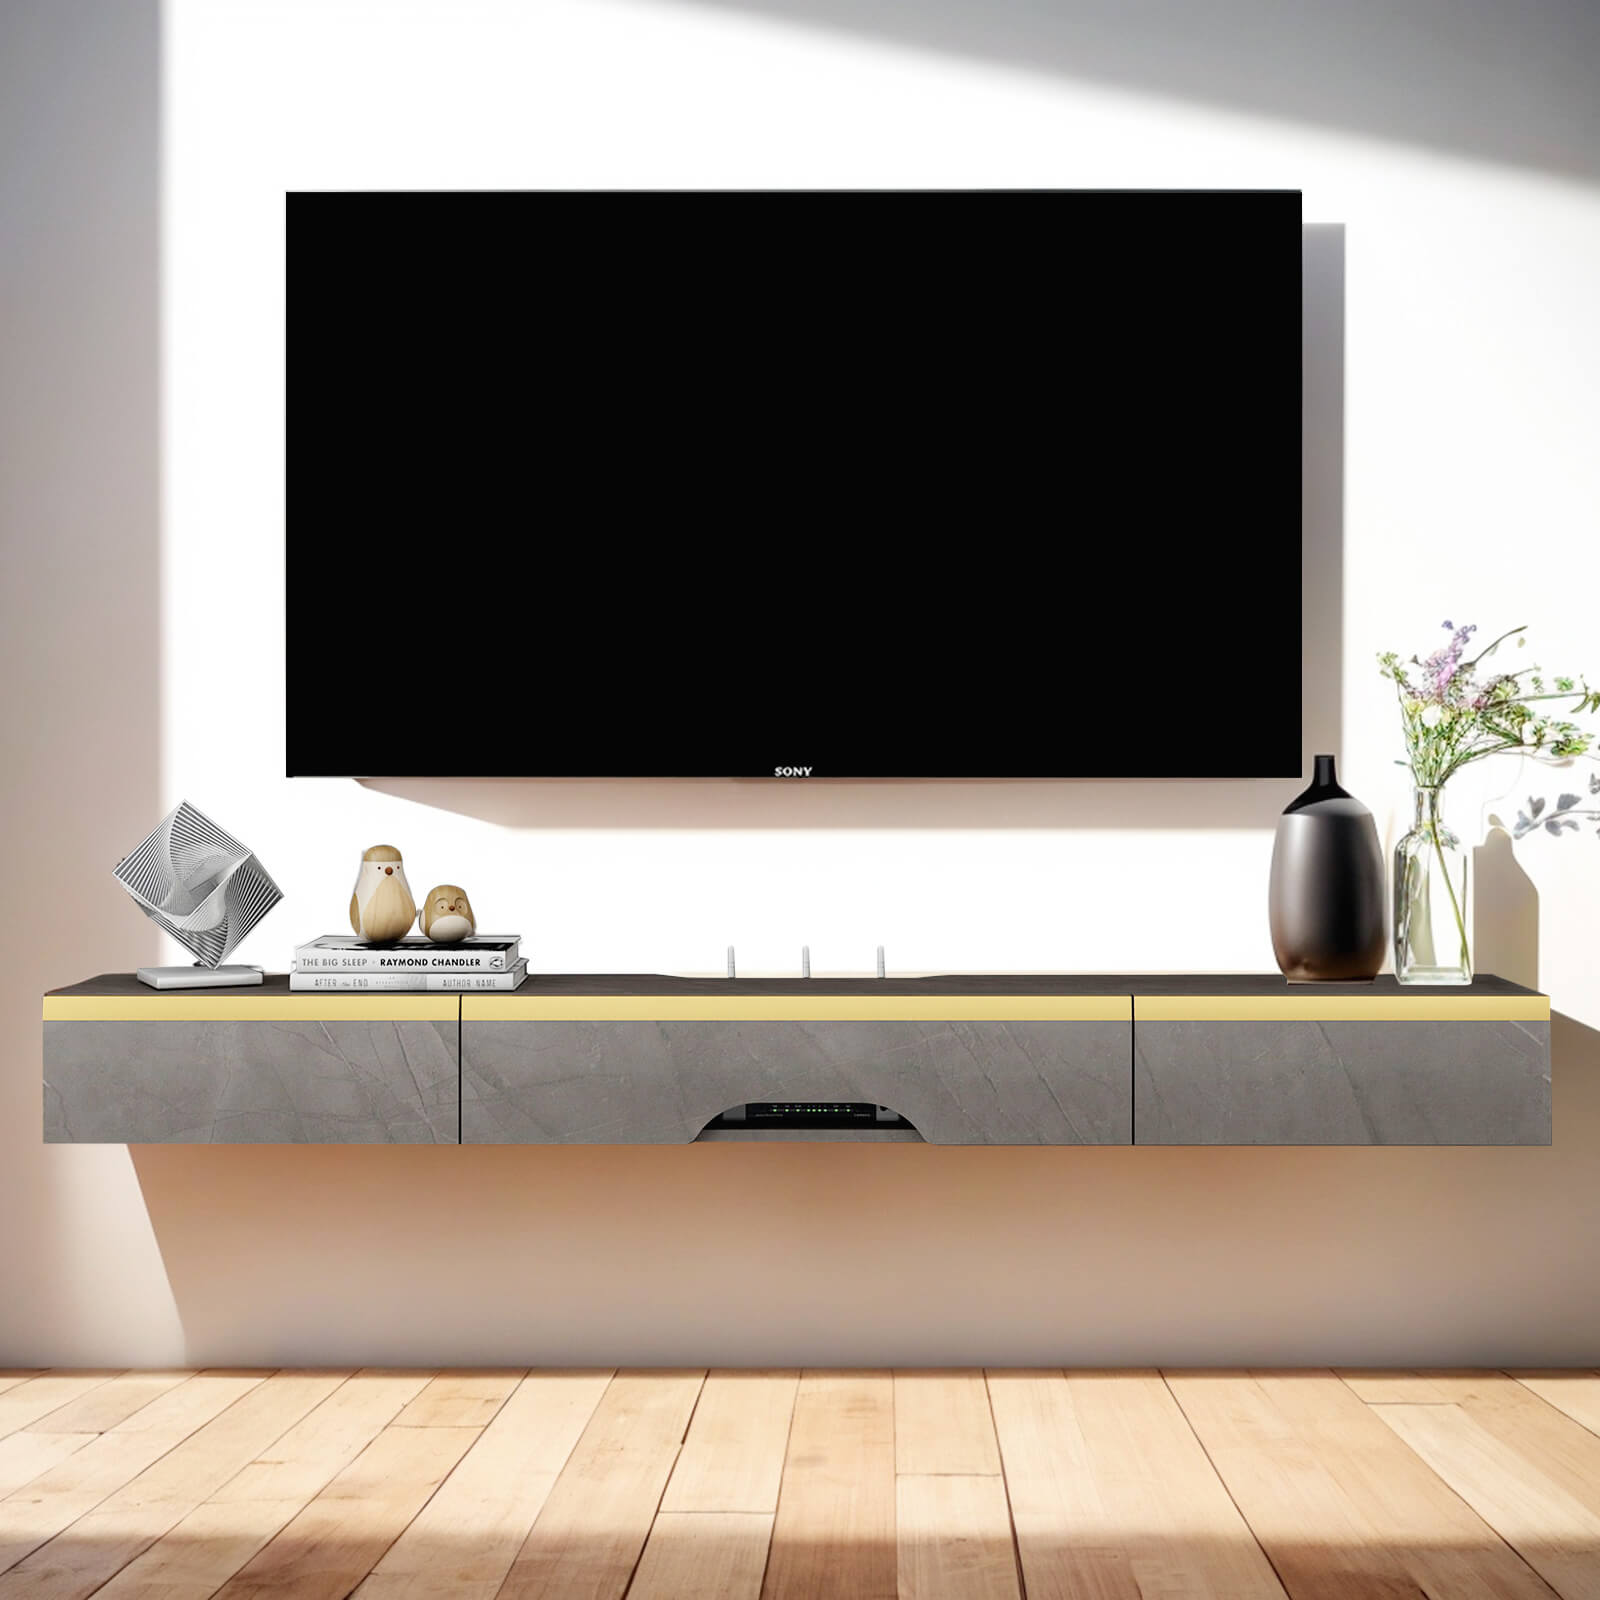 Plywood Floating TV Stand with Drawers for 60" 65" Televisions, Grey with Golden Accent